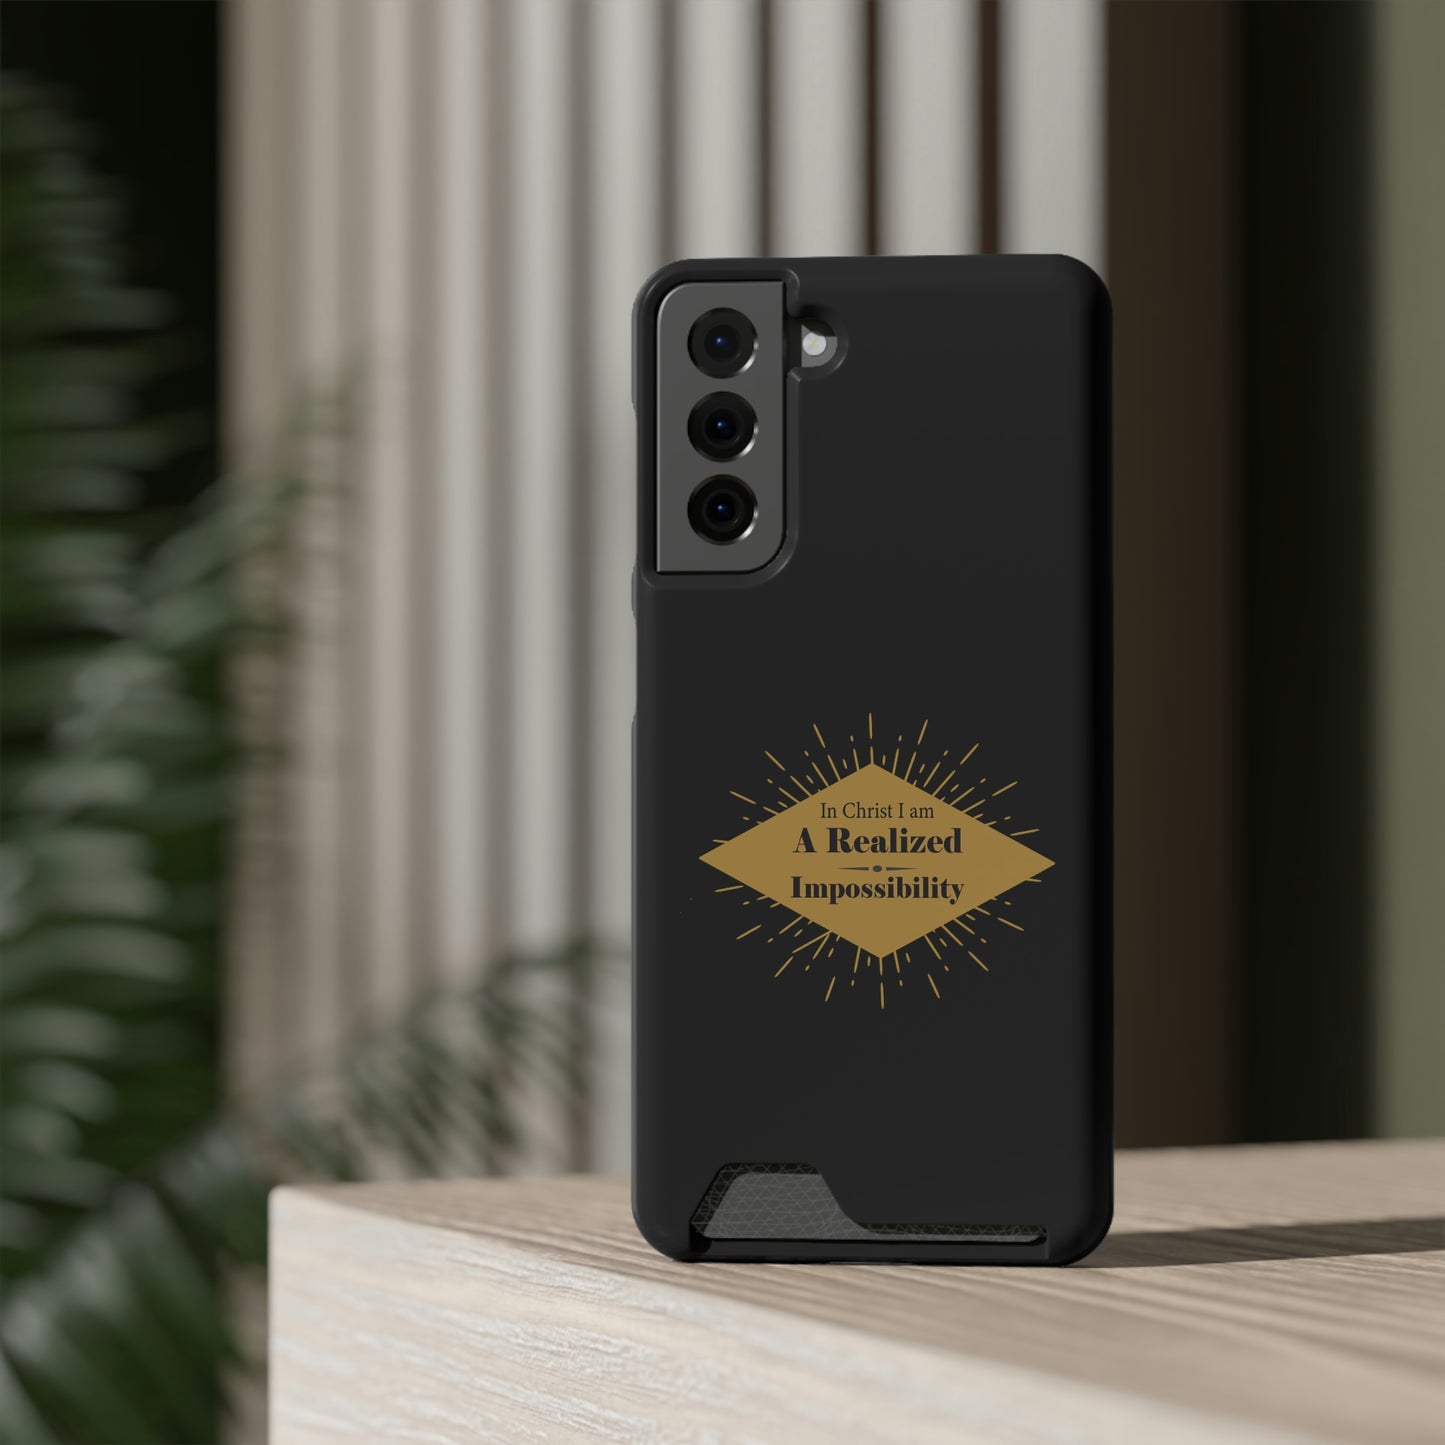 In Christ I Am A Realized Impossibility Phone Case With Card Holder